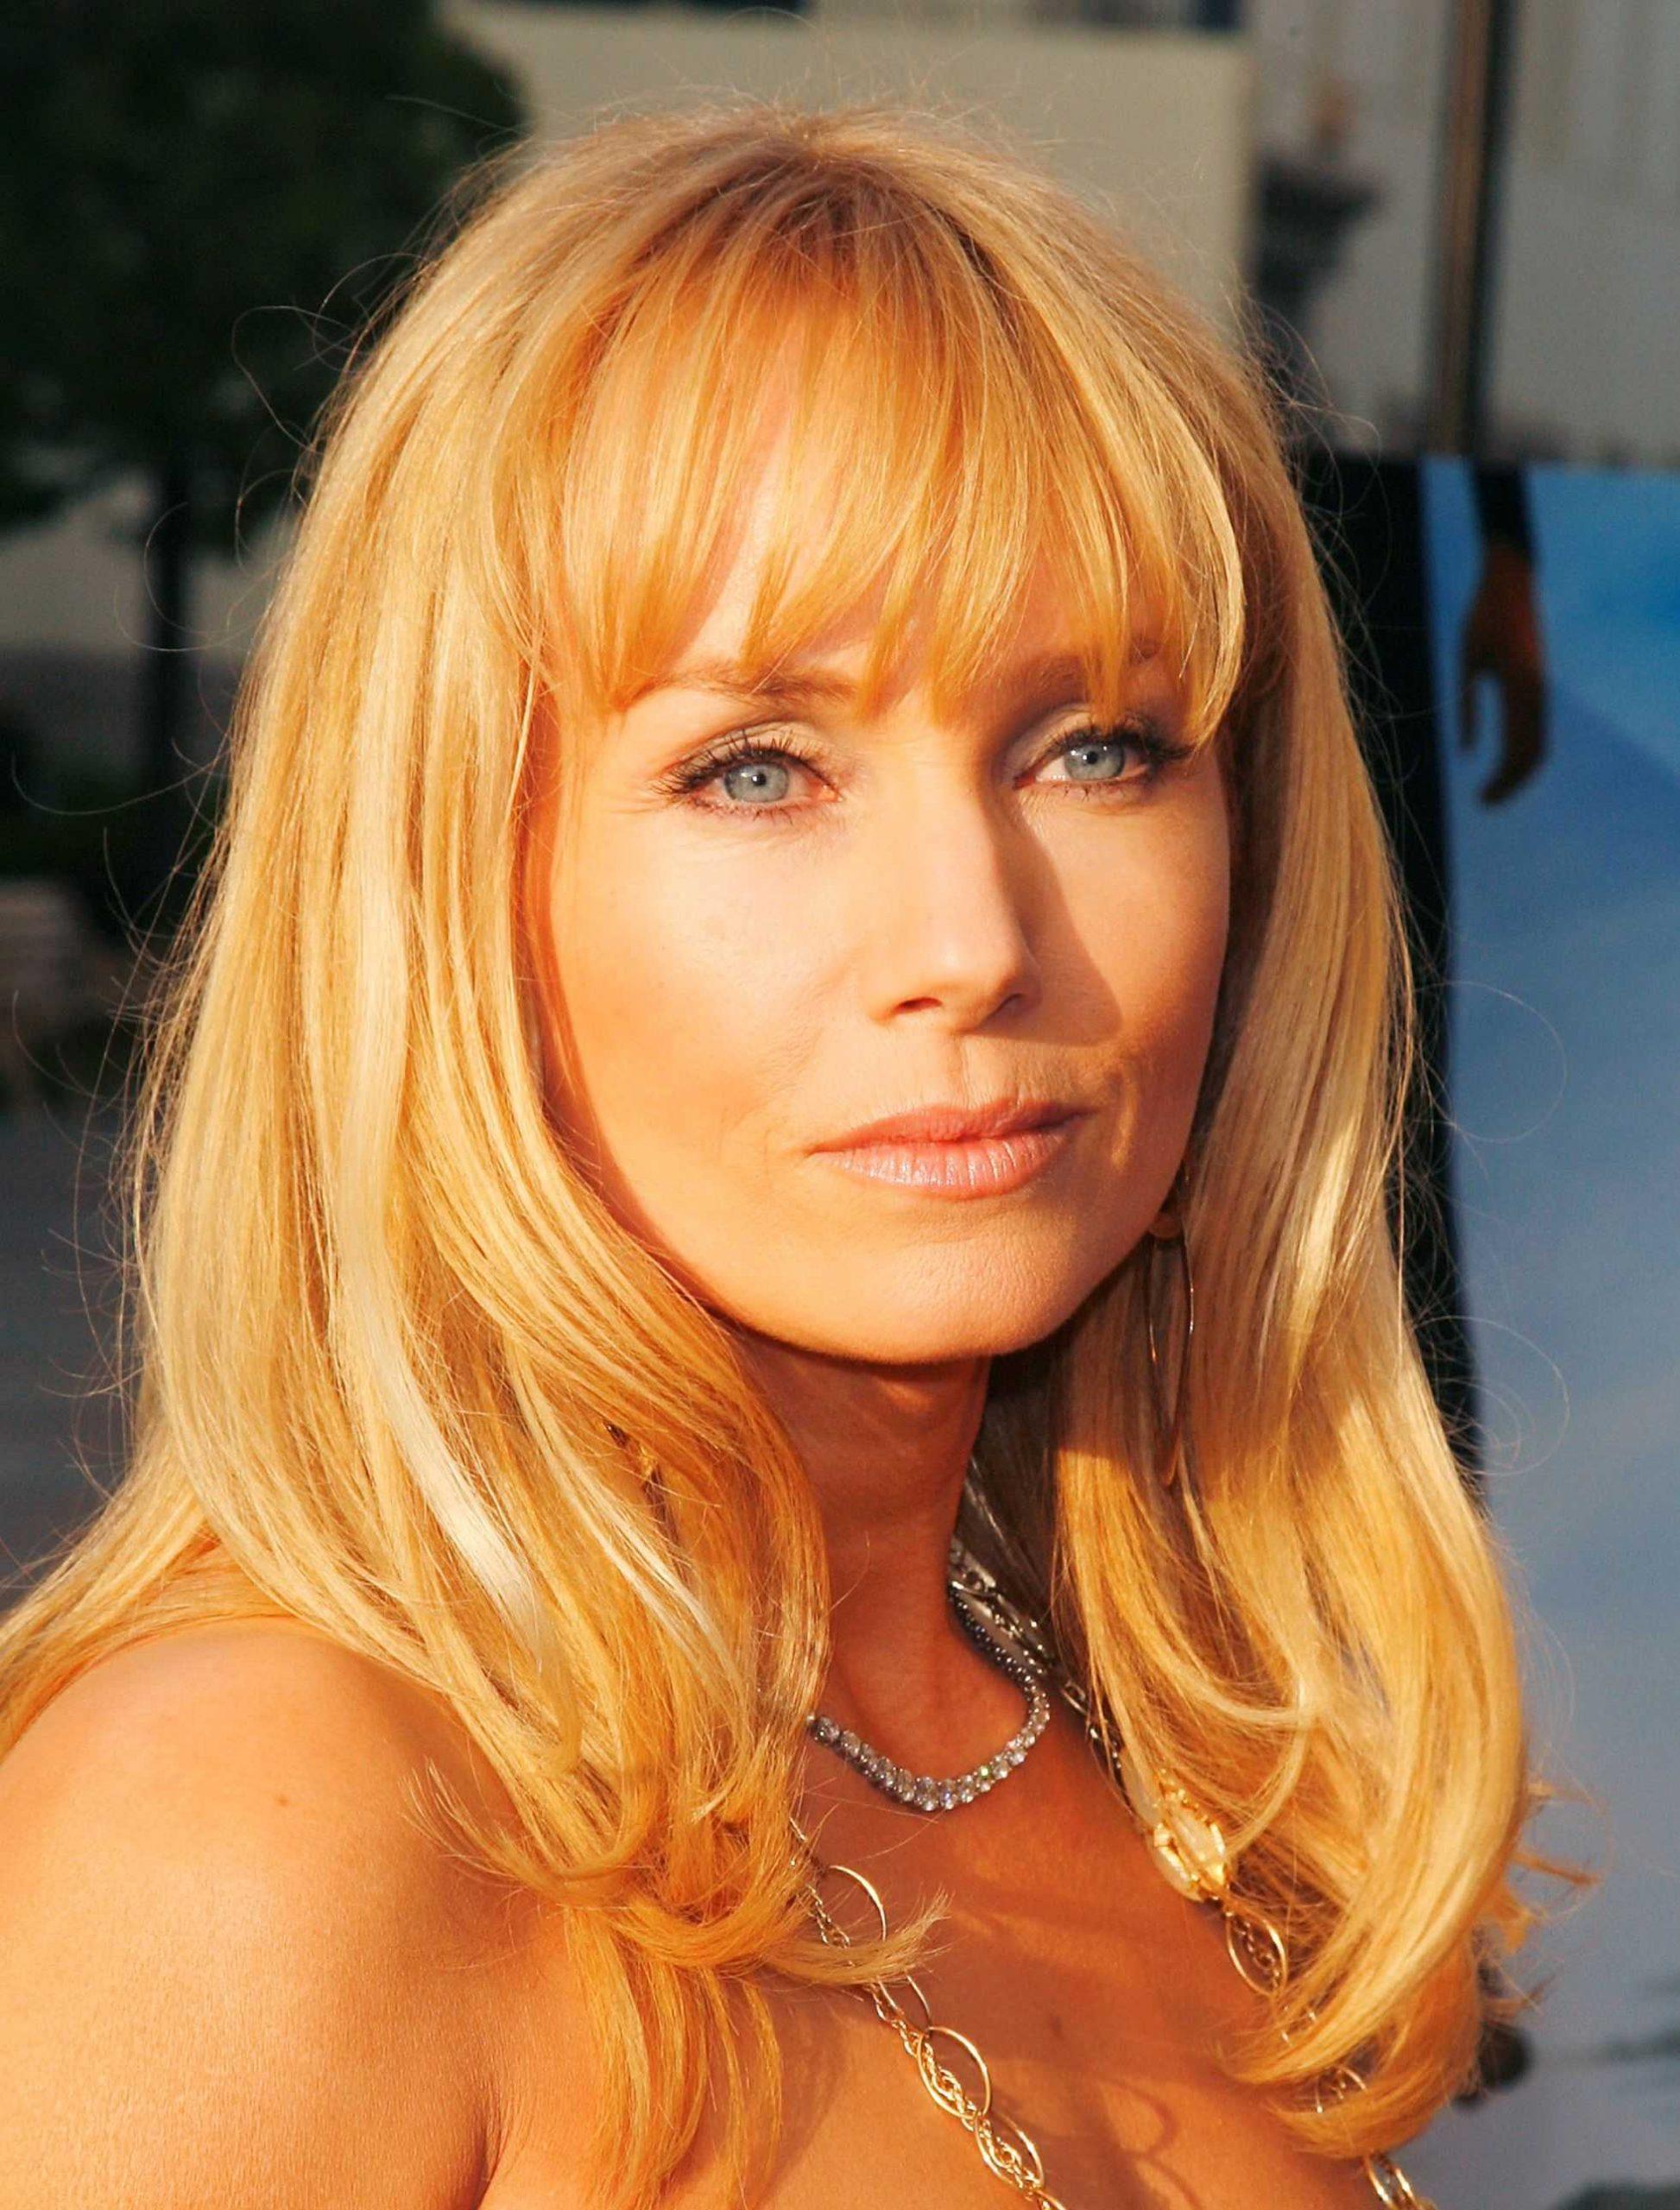 60+ Hot Pictures Of Rebecca De Mornay Which Are Way Too Steamy | Best Of Comic Books